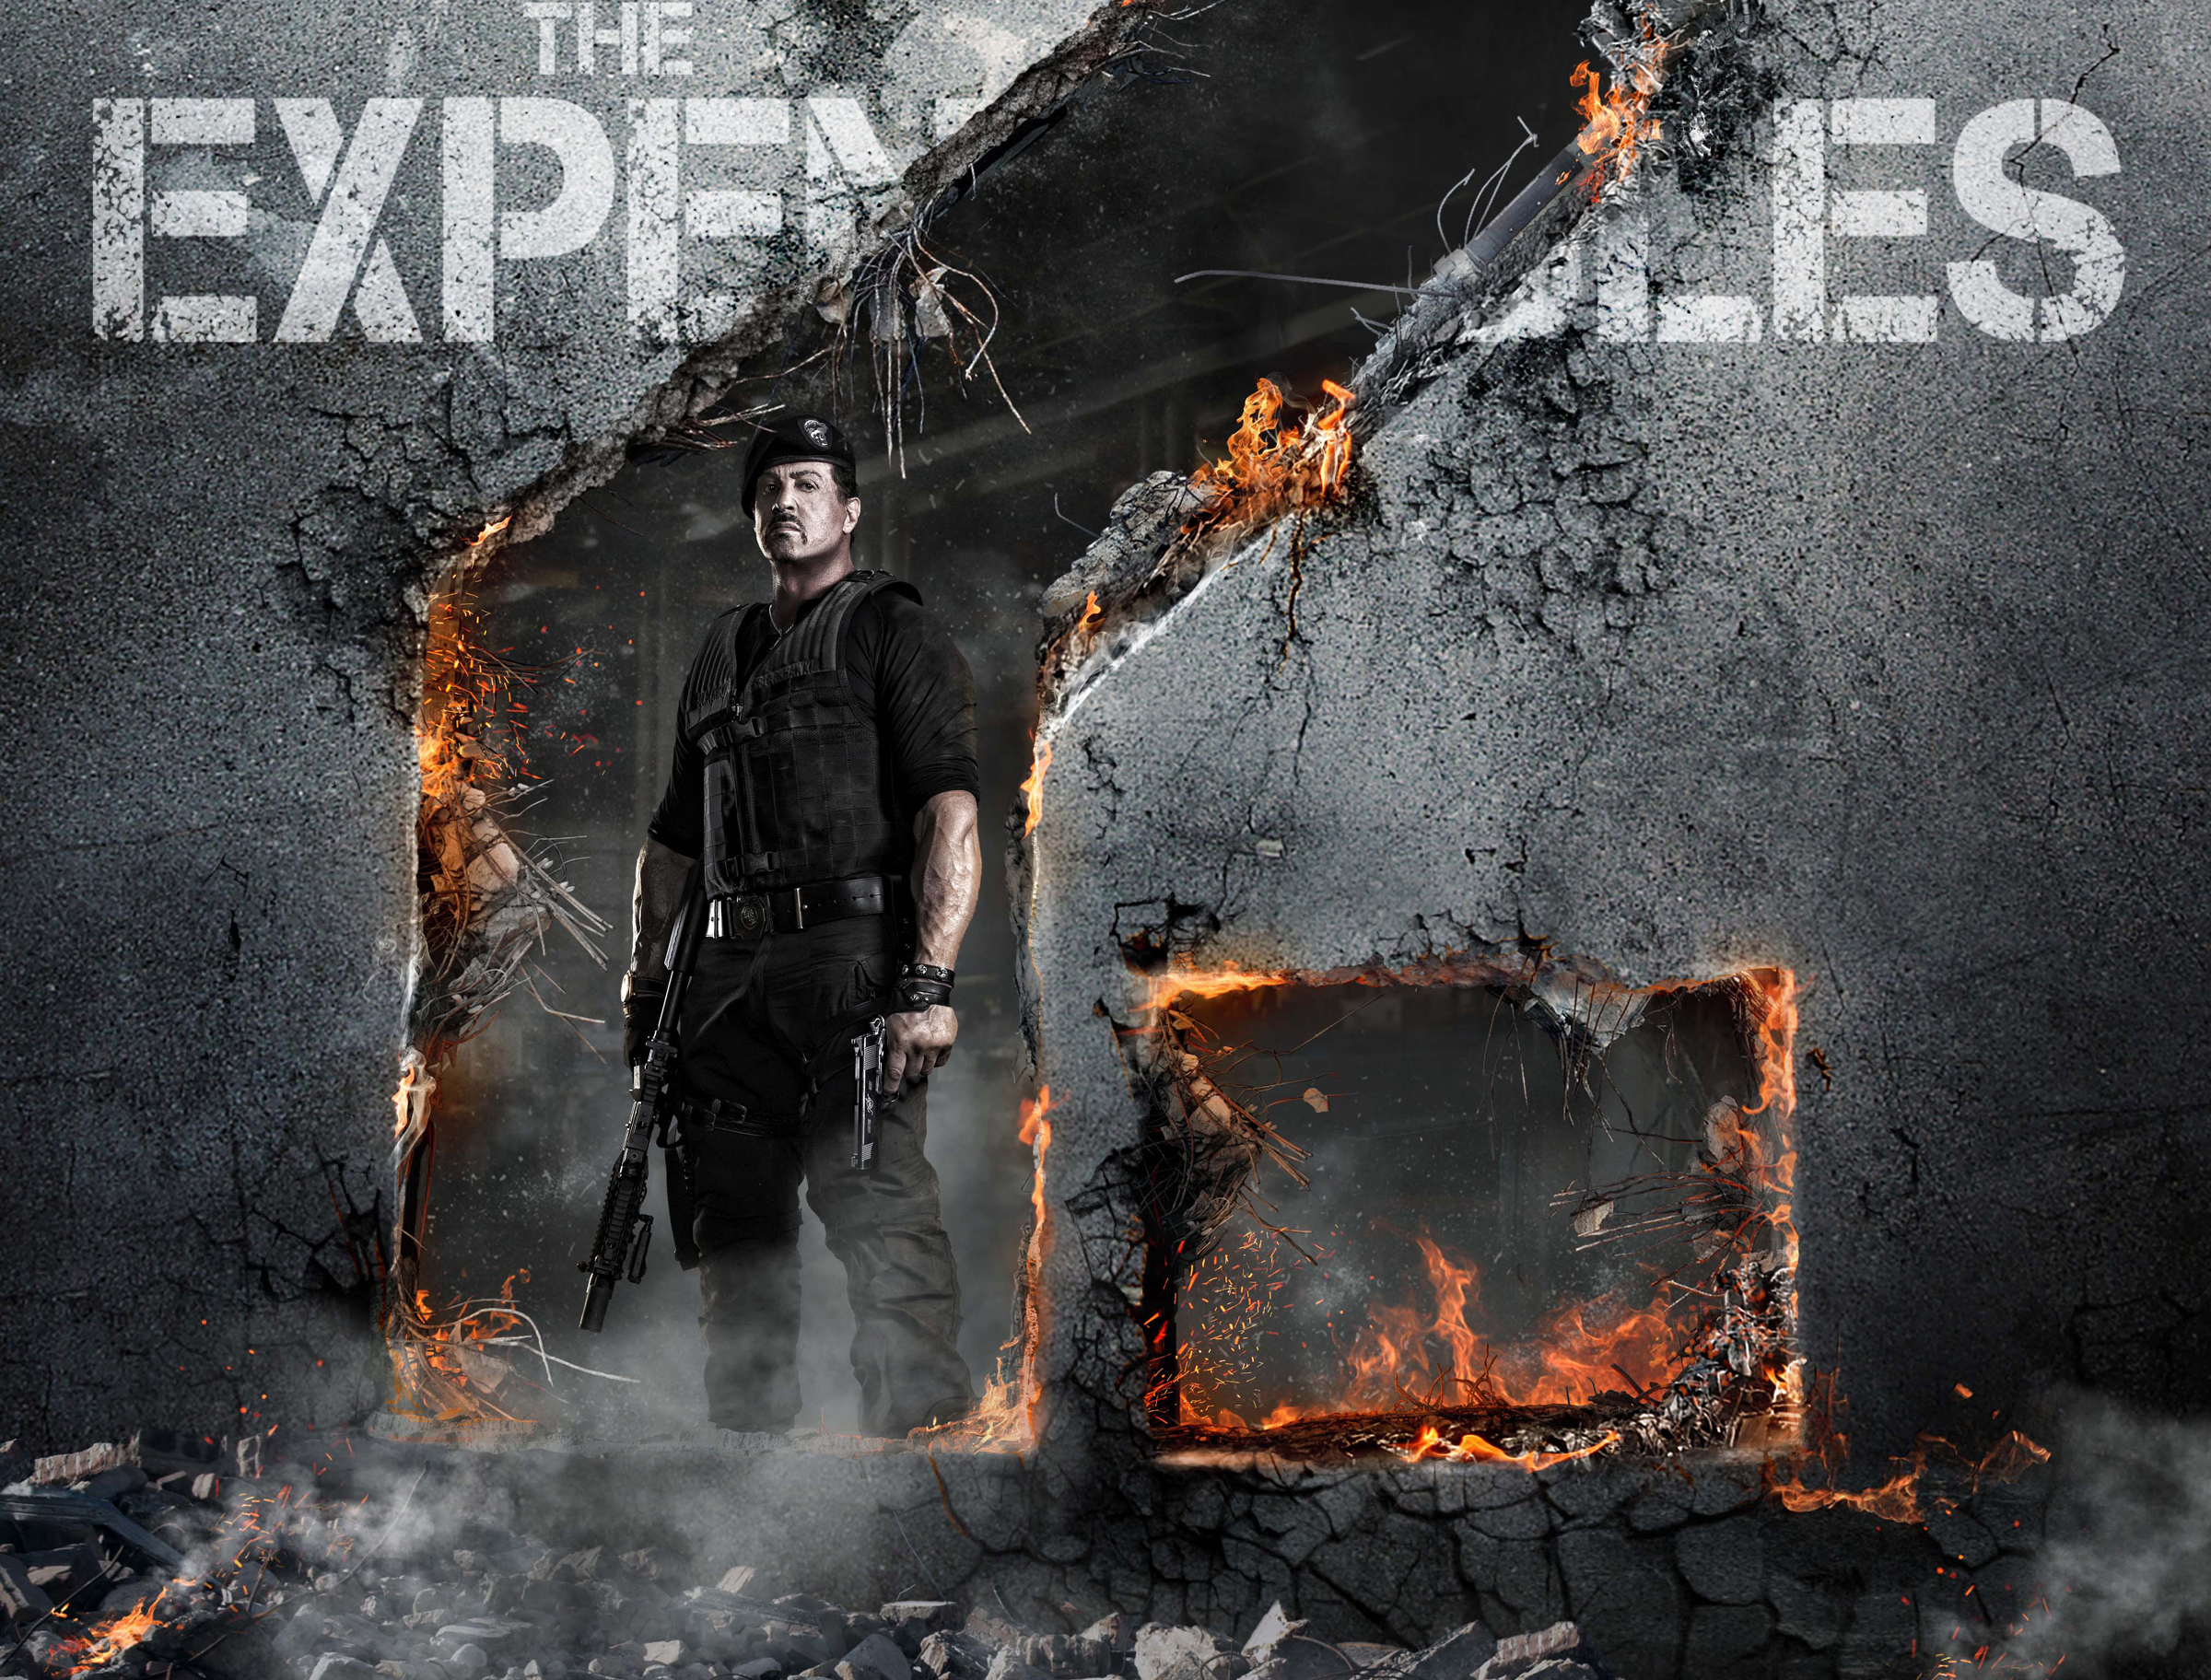 movie, the expendables 2, barney ross, sylvester stallone, the expendables